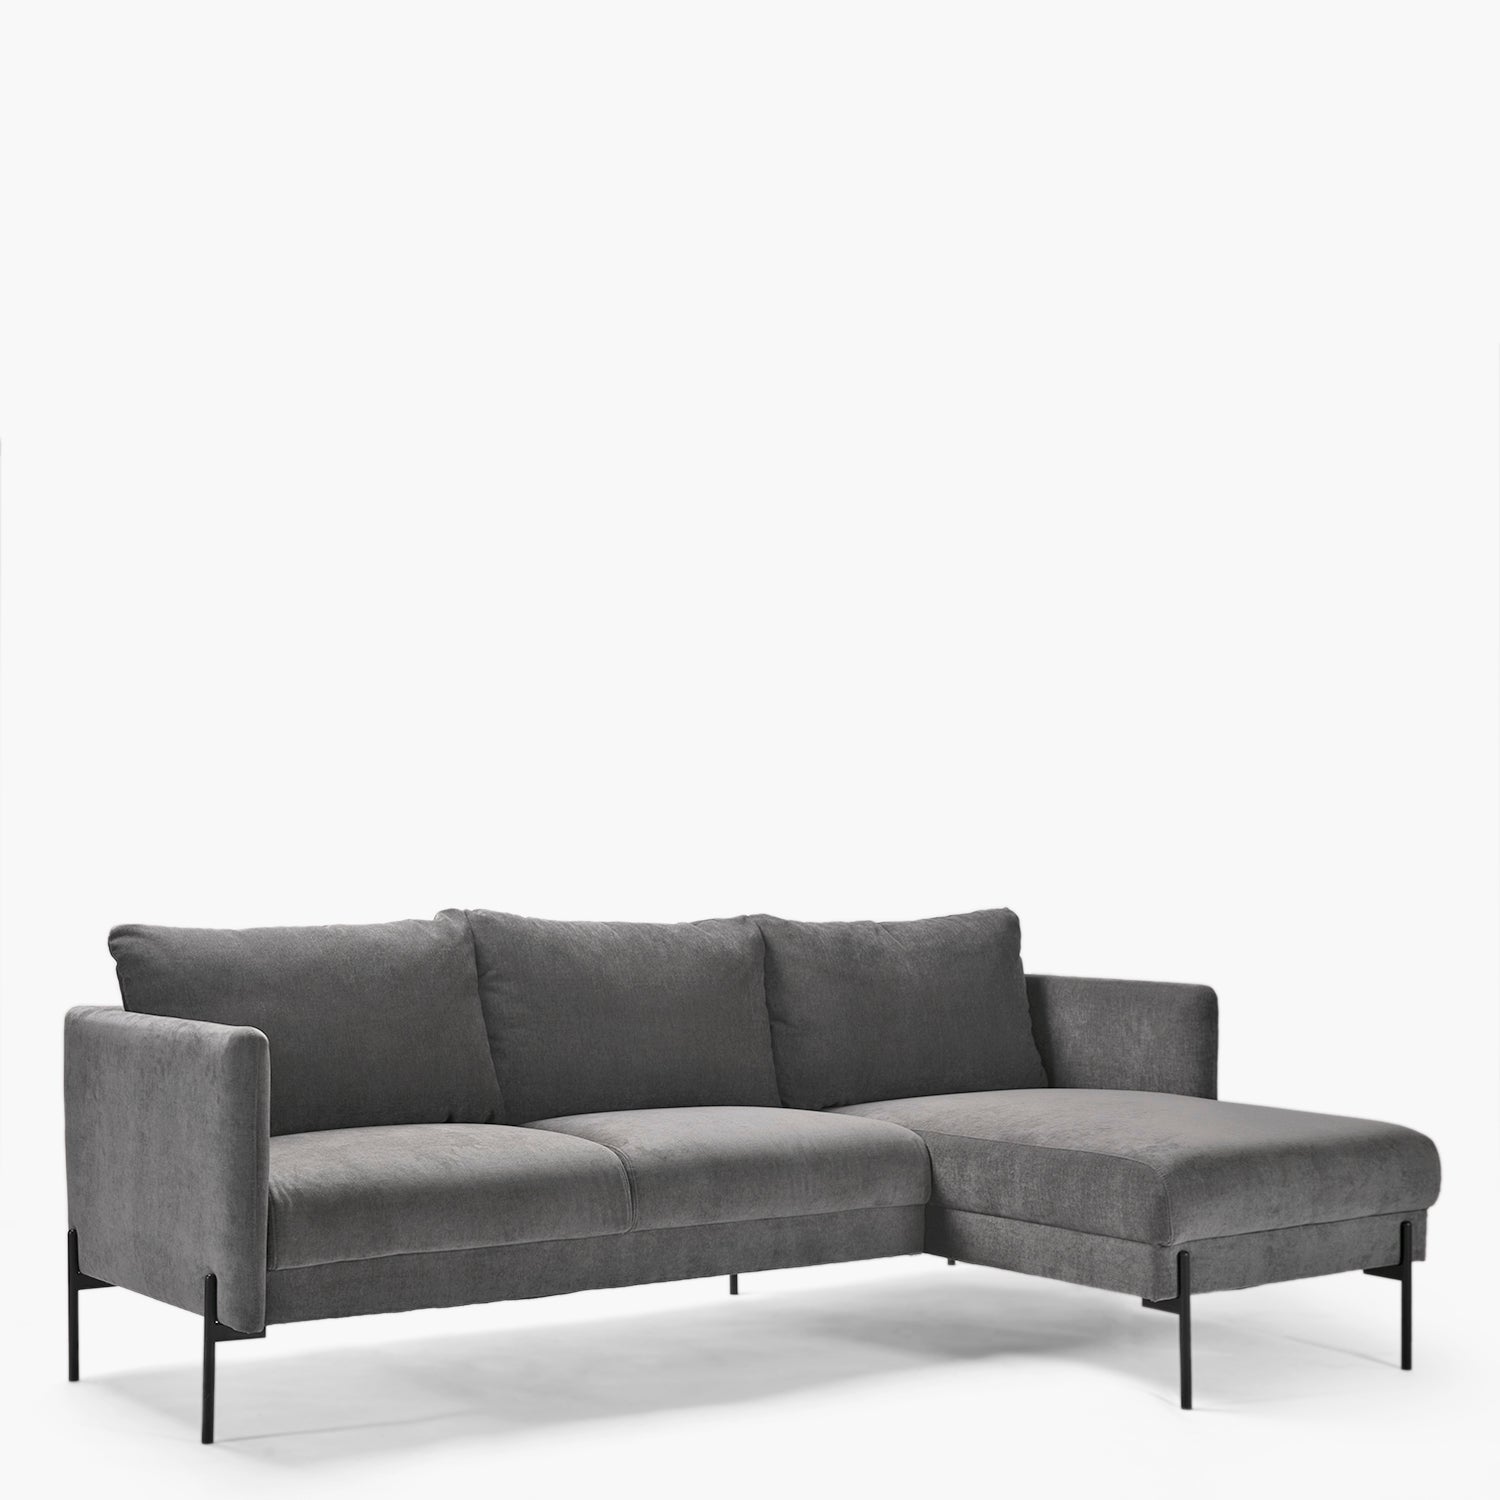 Seccional 2C +Chaise derecho Kingsley Gris Oscuro